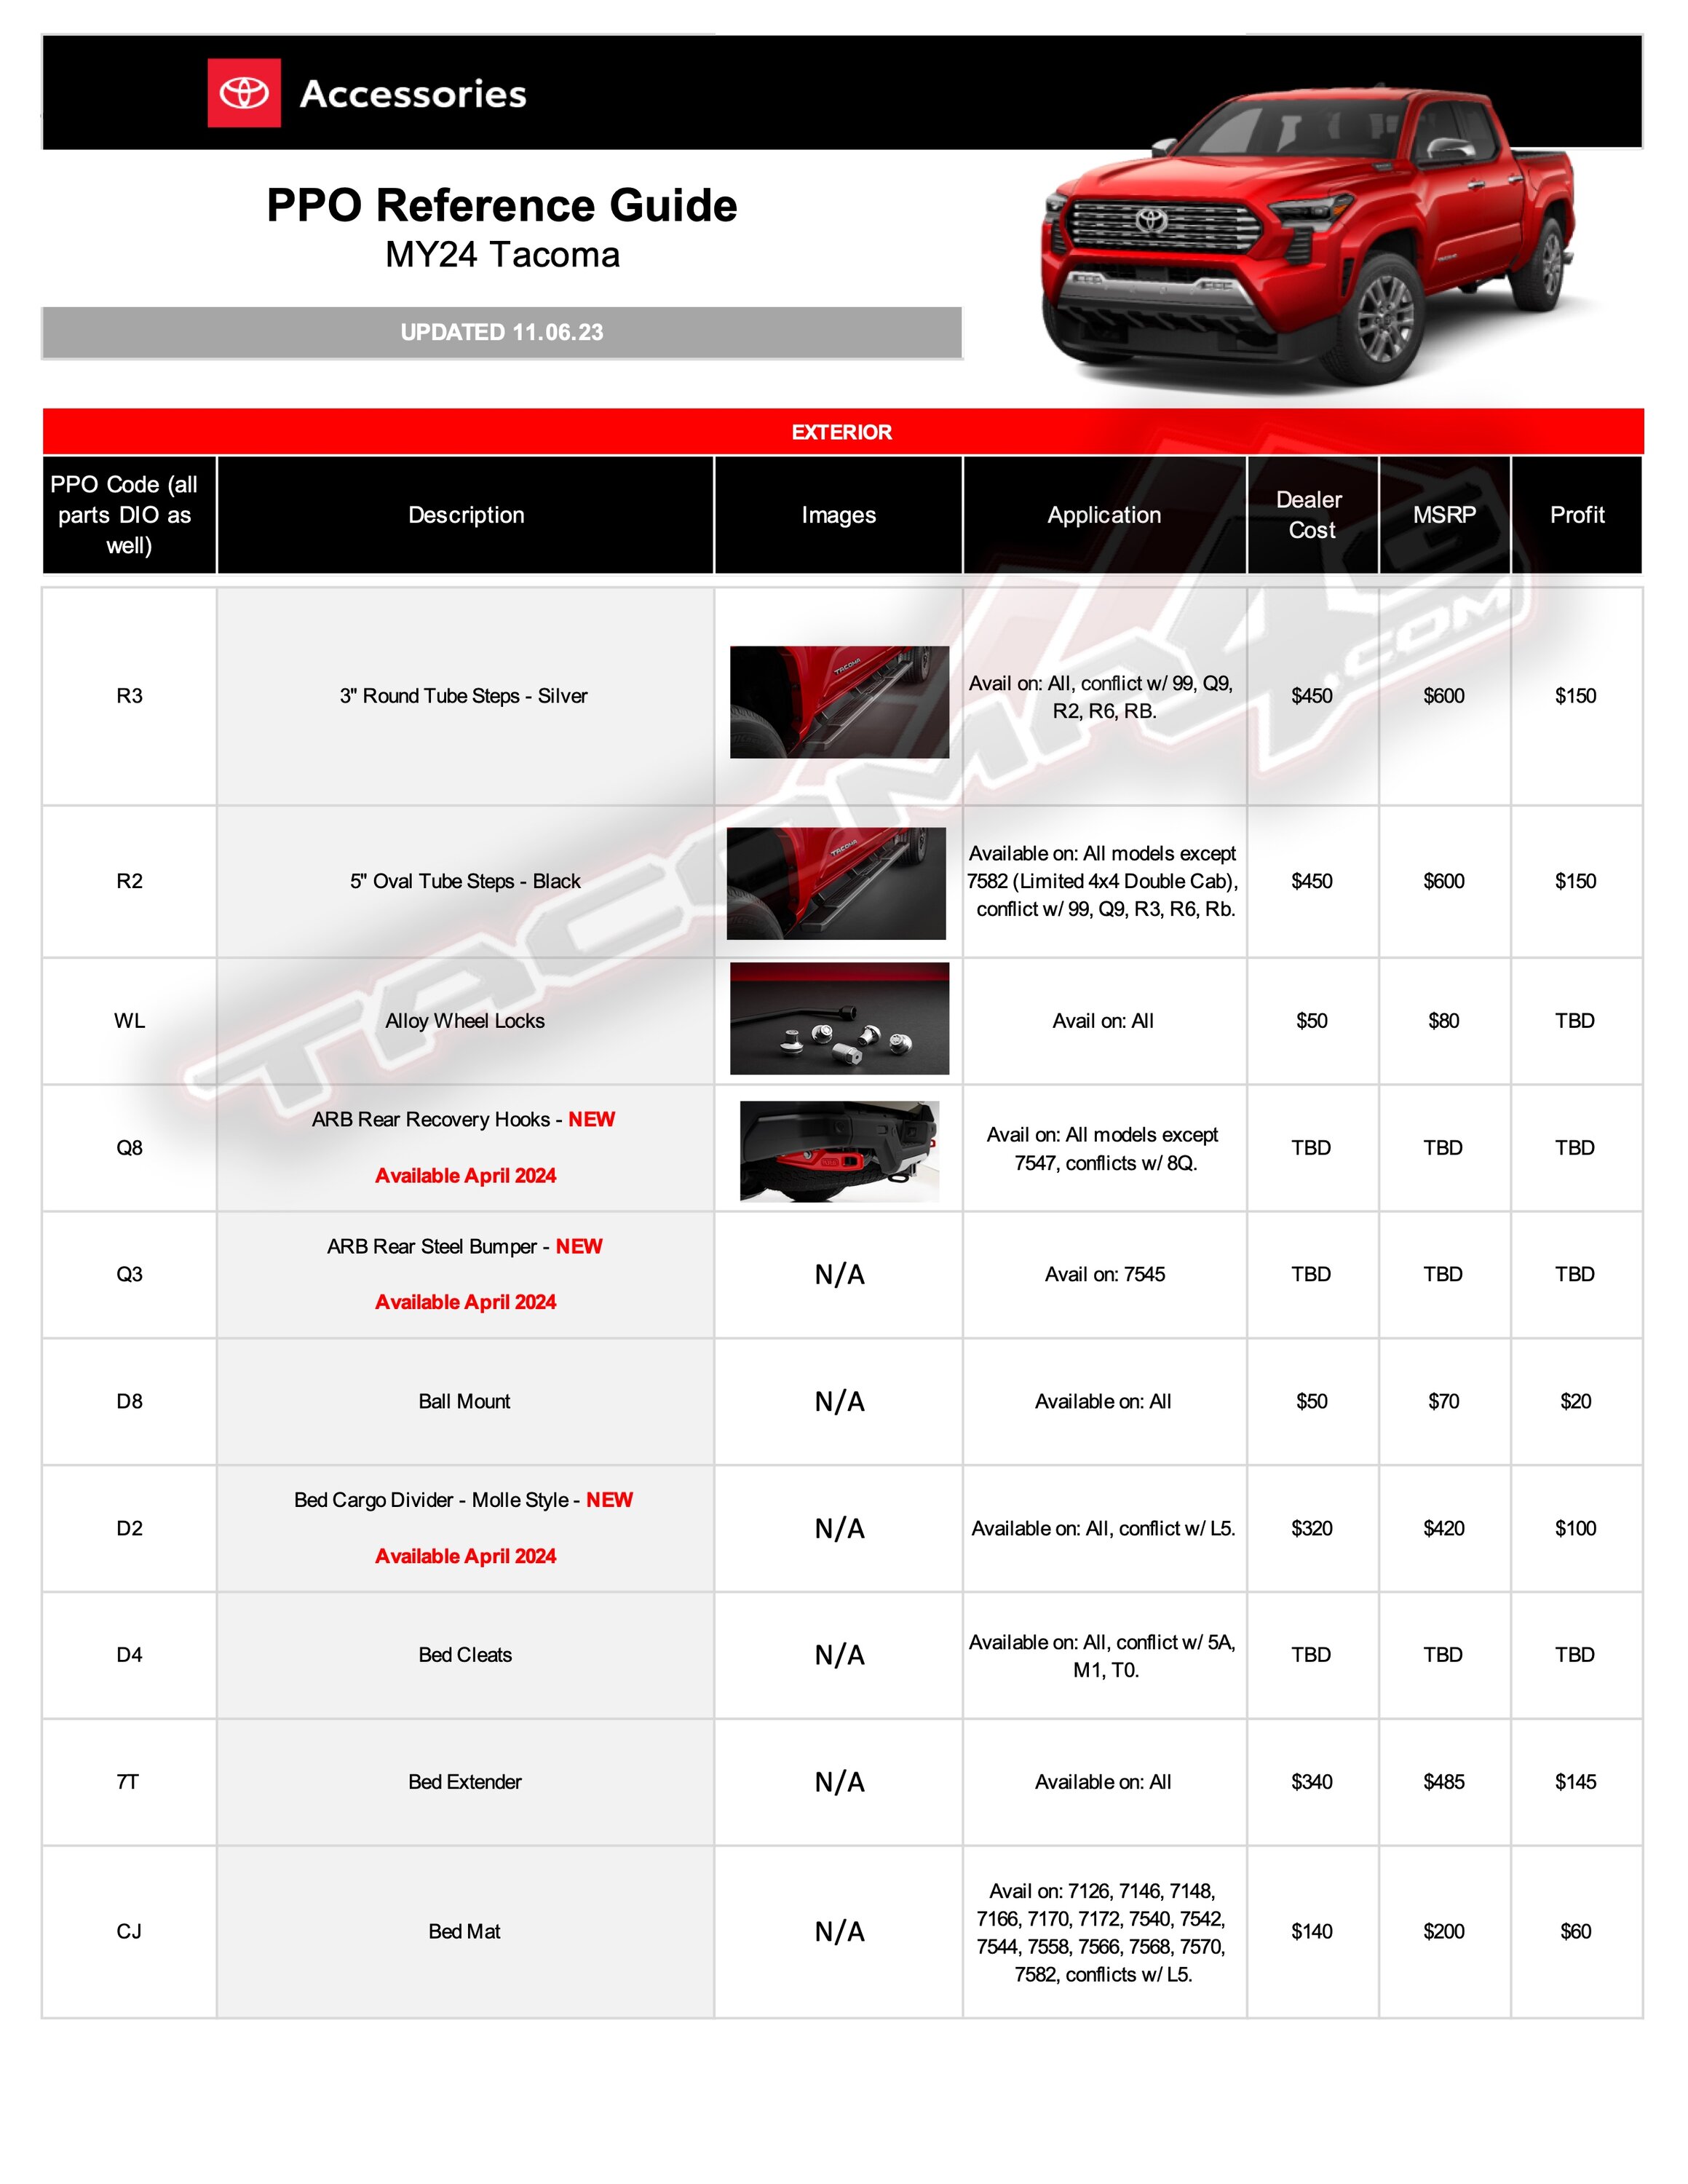 2024 Tacoma 2024 Tacoma Post-Production Options (PPO) Guide - OEM / TRD Accessories Parts + Pricing!  [UPDATED 4-24-24] 2024-tacoma-accessory-guide-1